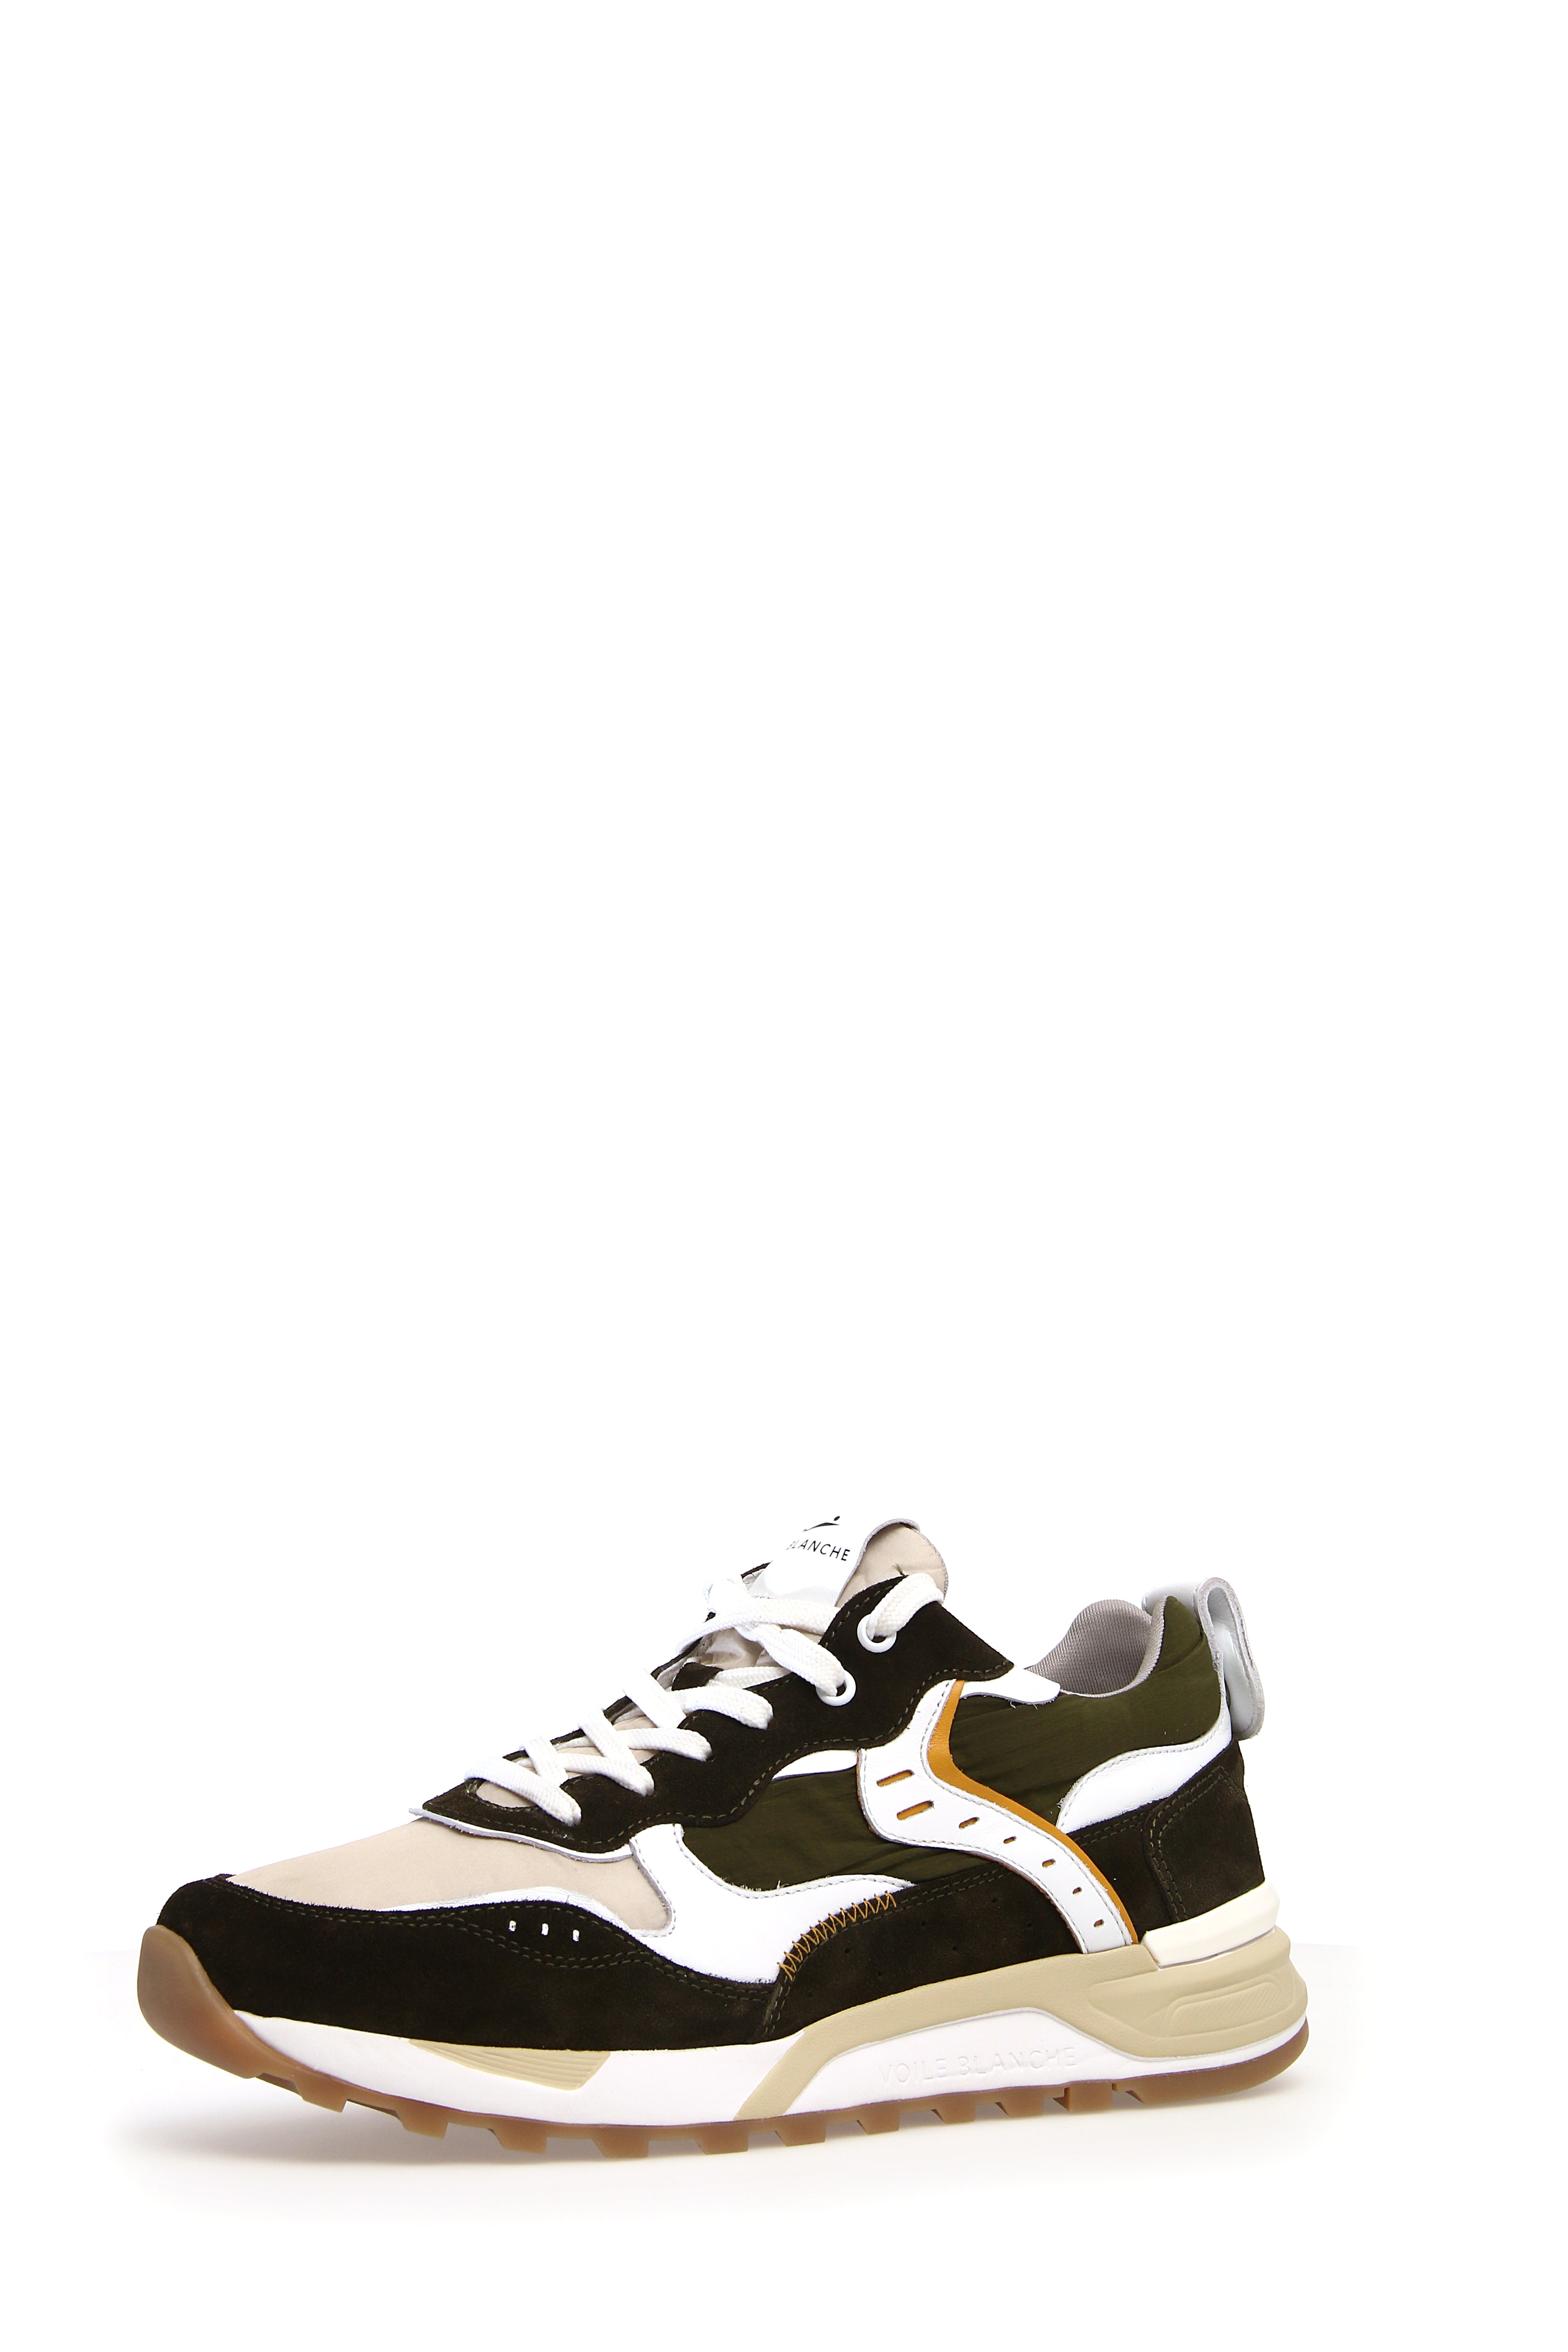 VOILE BLANCHE Sneakers Uomo 2017617 Army-Beige-White